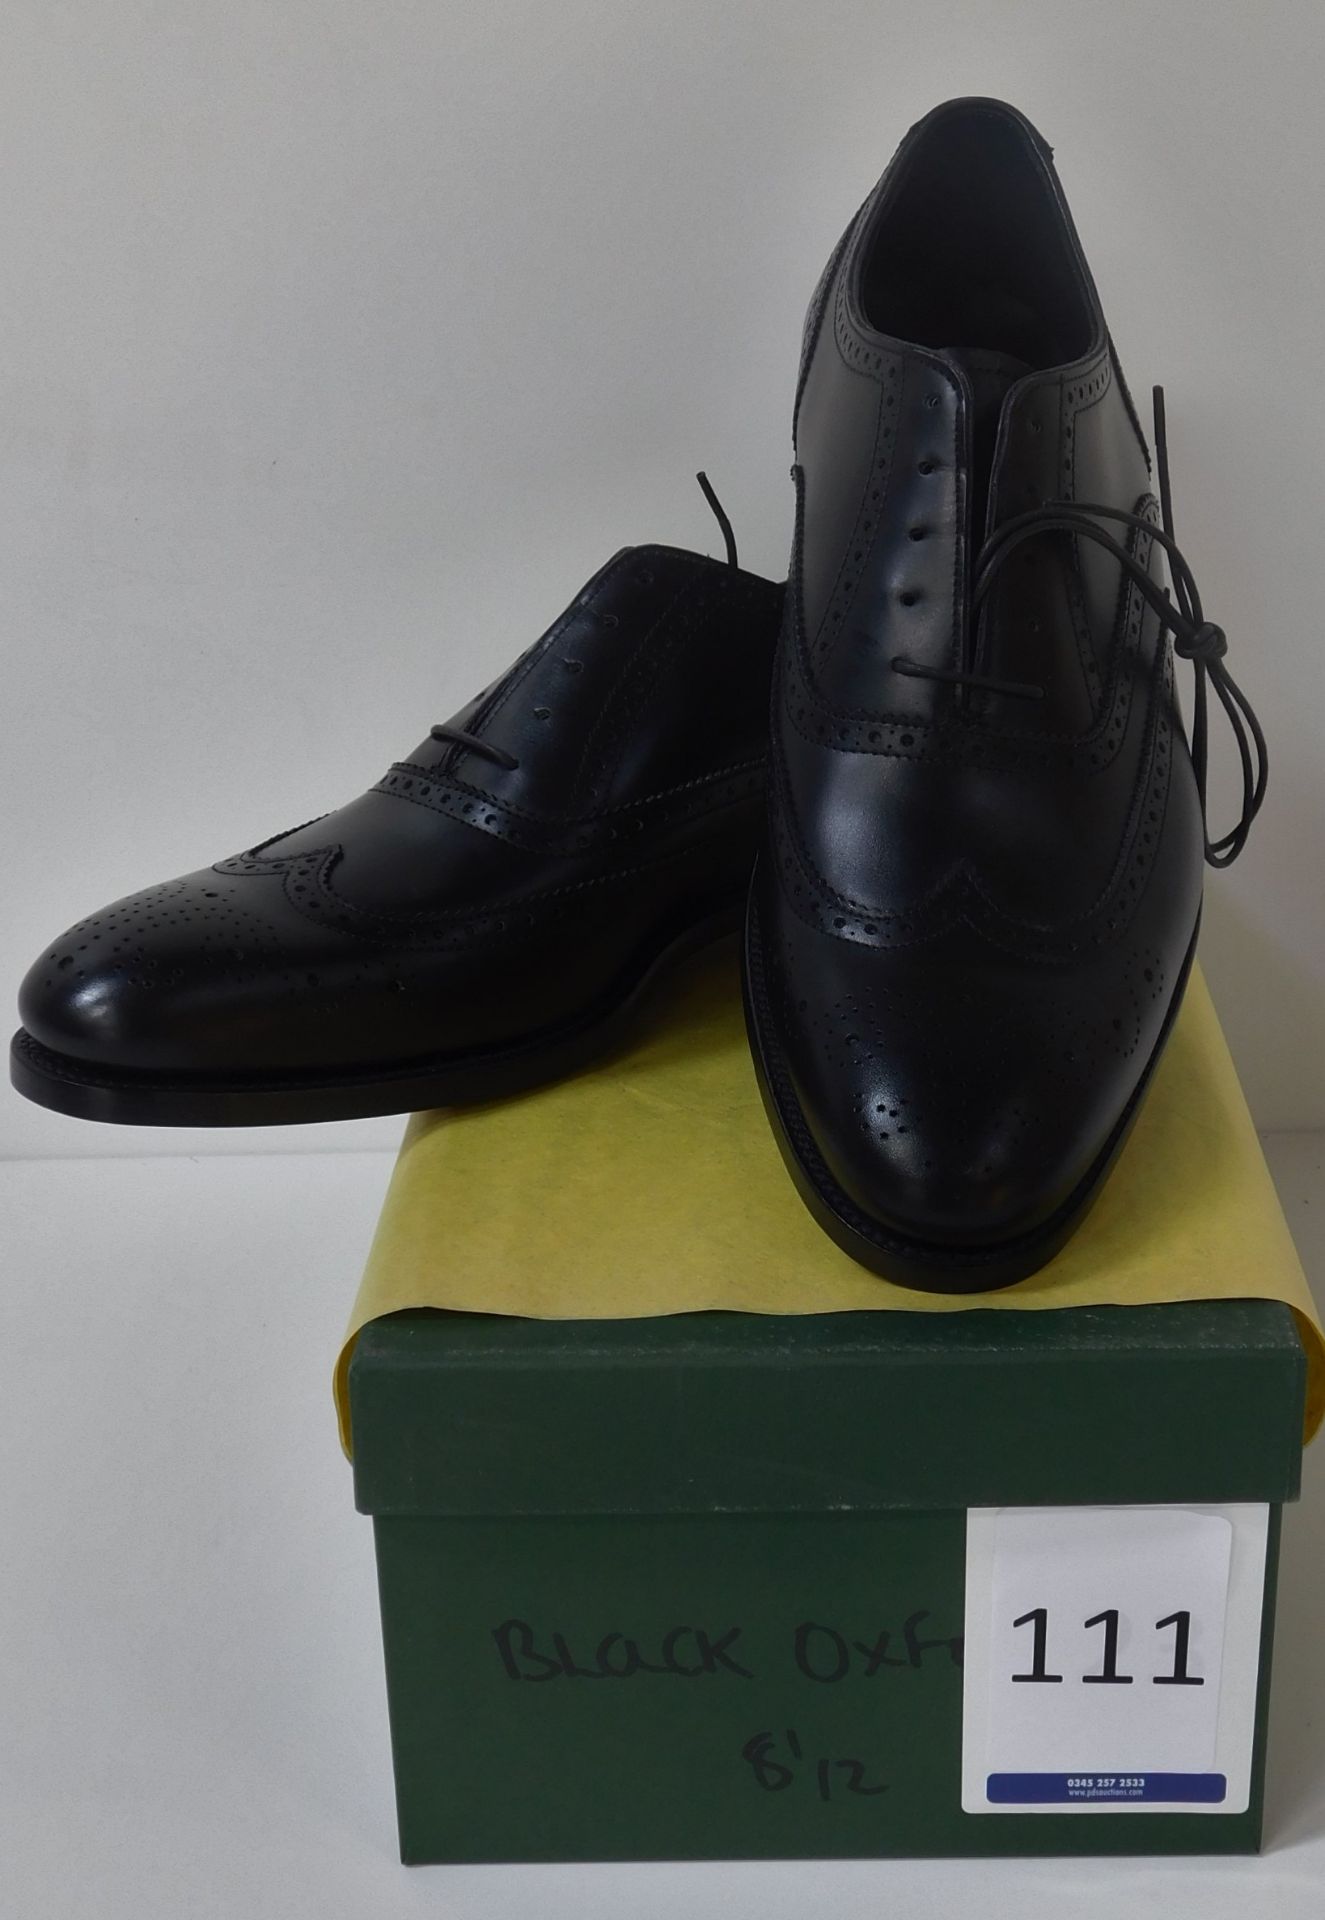 Pair of Alfred Sargent Black Oxford, Size 8.5 (Slight Seconds) (Location: Brentwood - See General